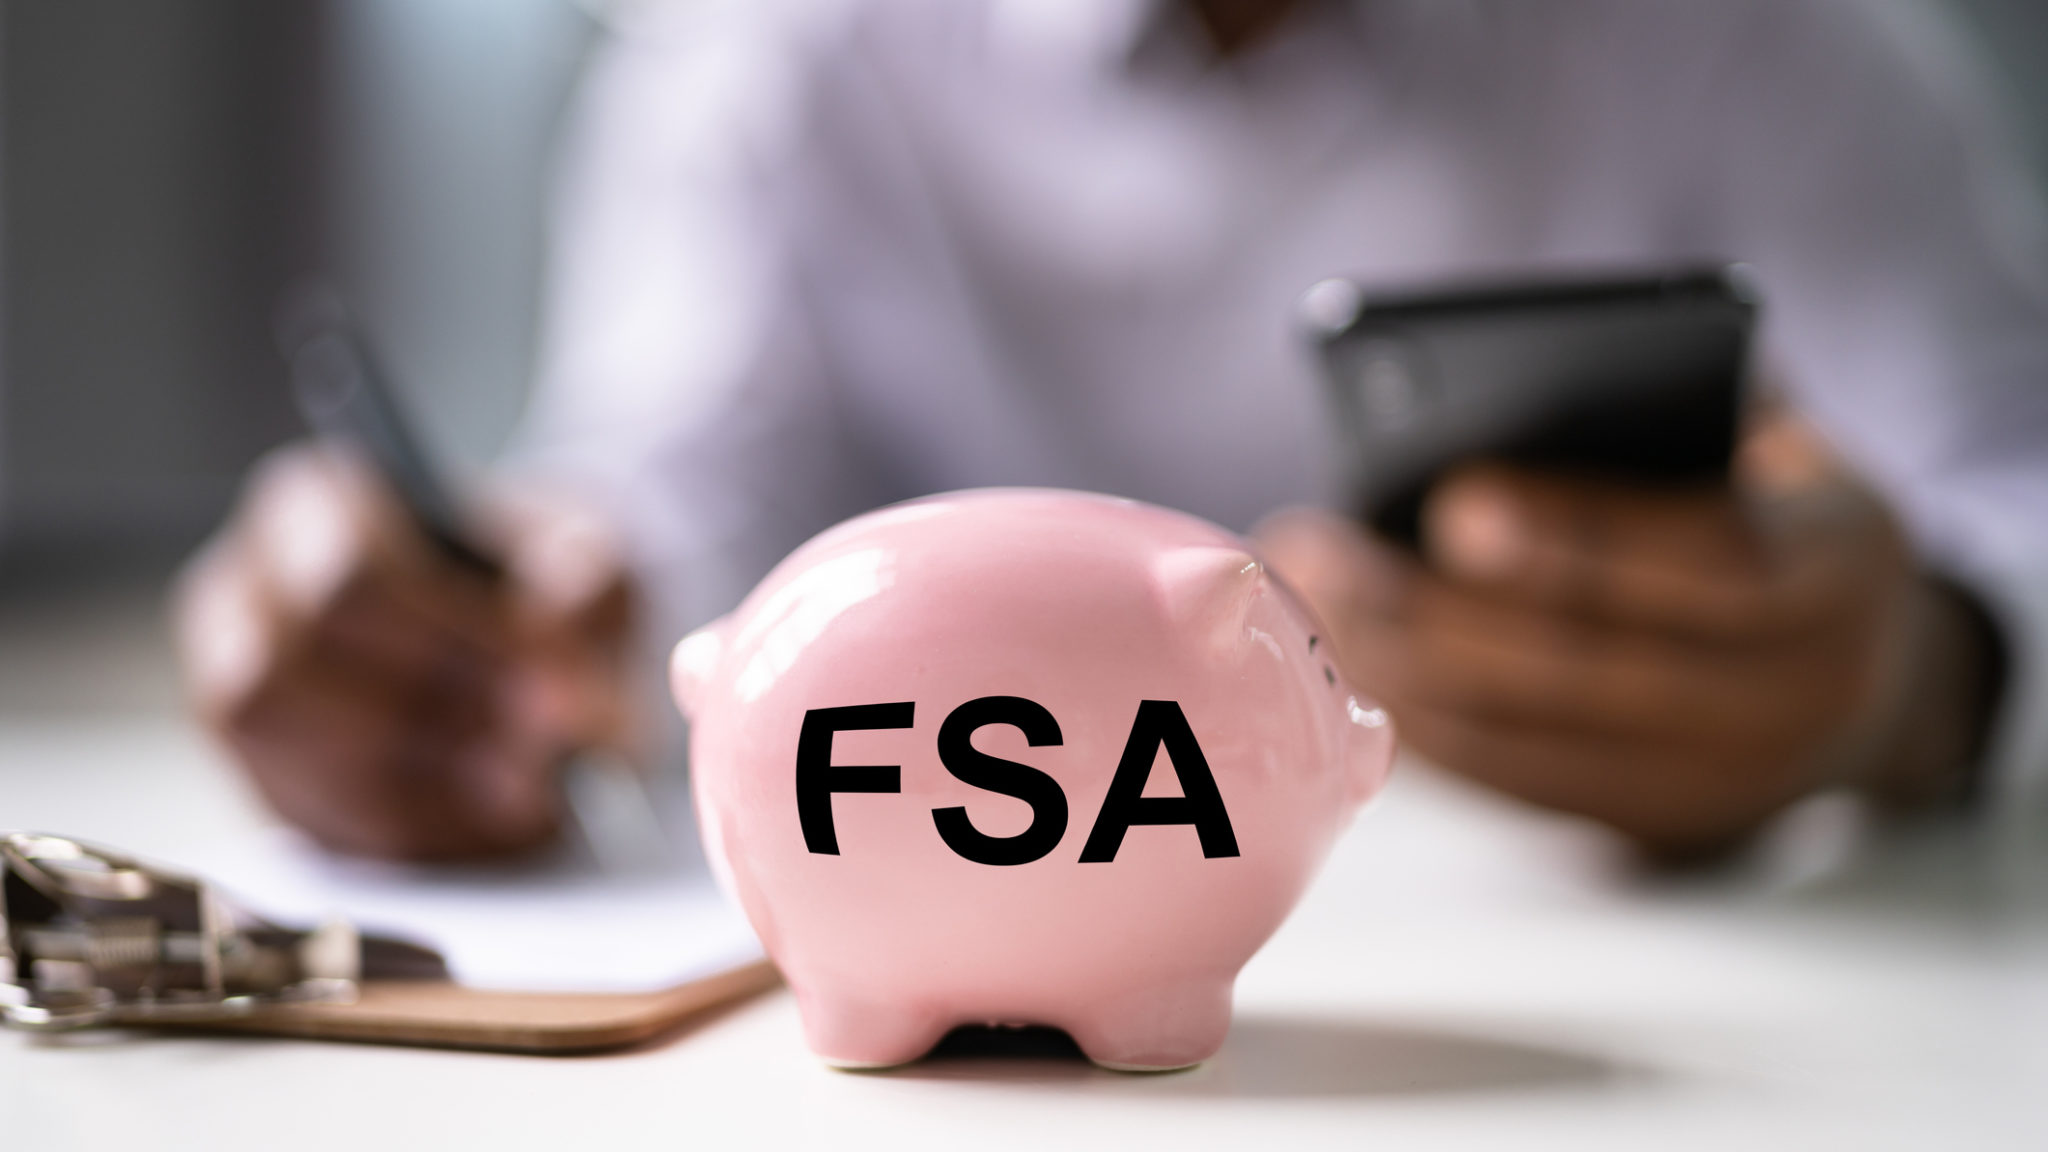 Flexible Spending Account (FSA) Solution for Employers